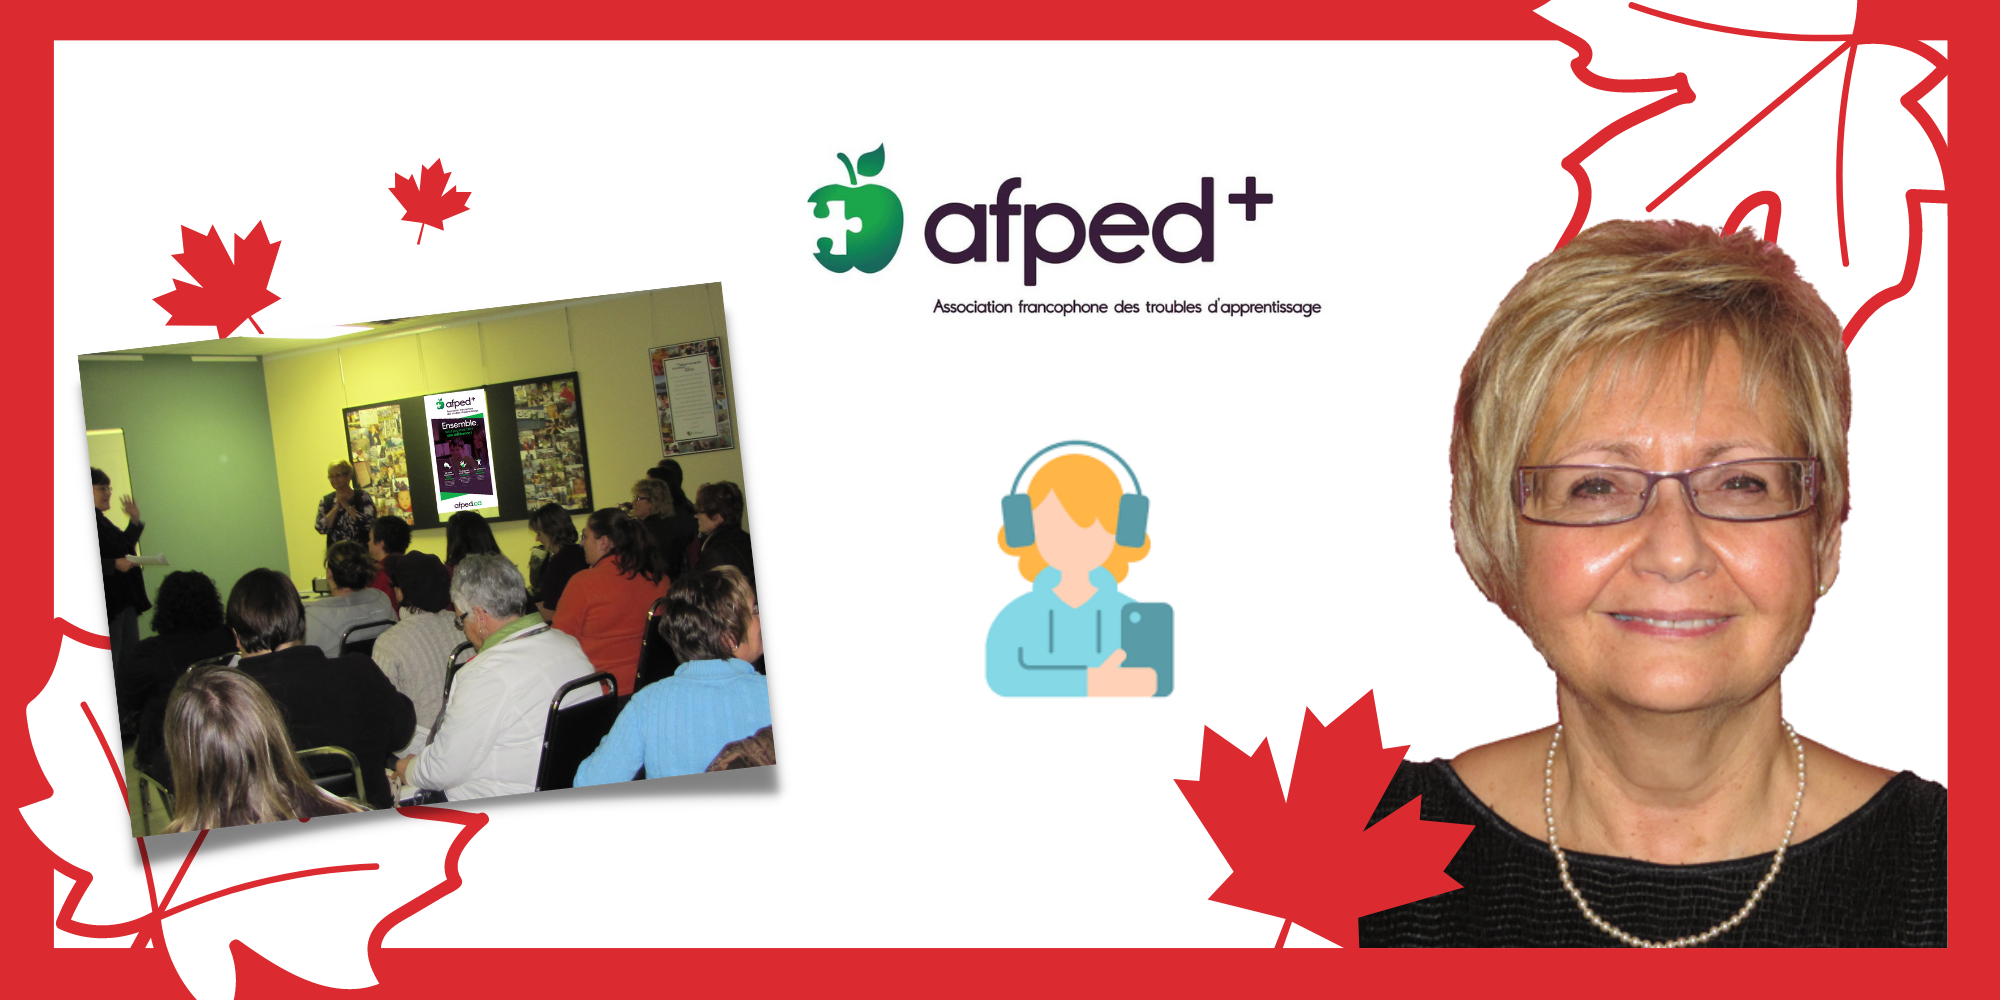 Graphic contains a meeting photo, AFPED+ logo, headshot of Suzanne Bonneville, and girl wearing headphone, accented by Canadian maple leaves in red and white